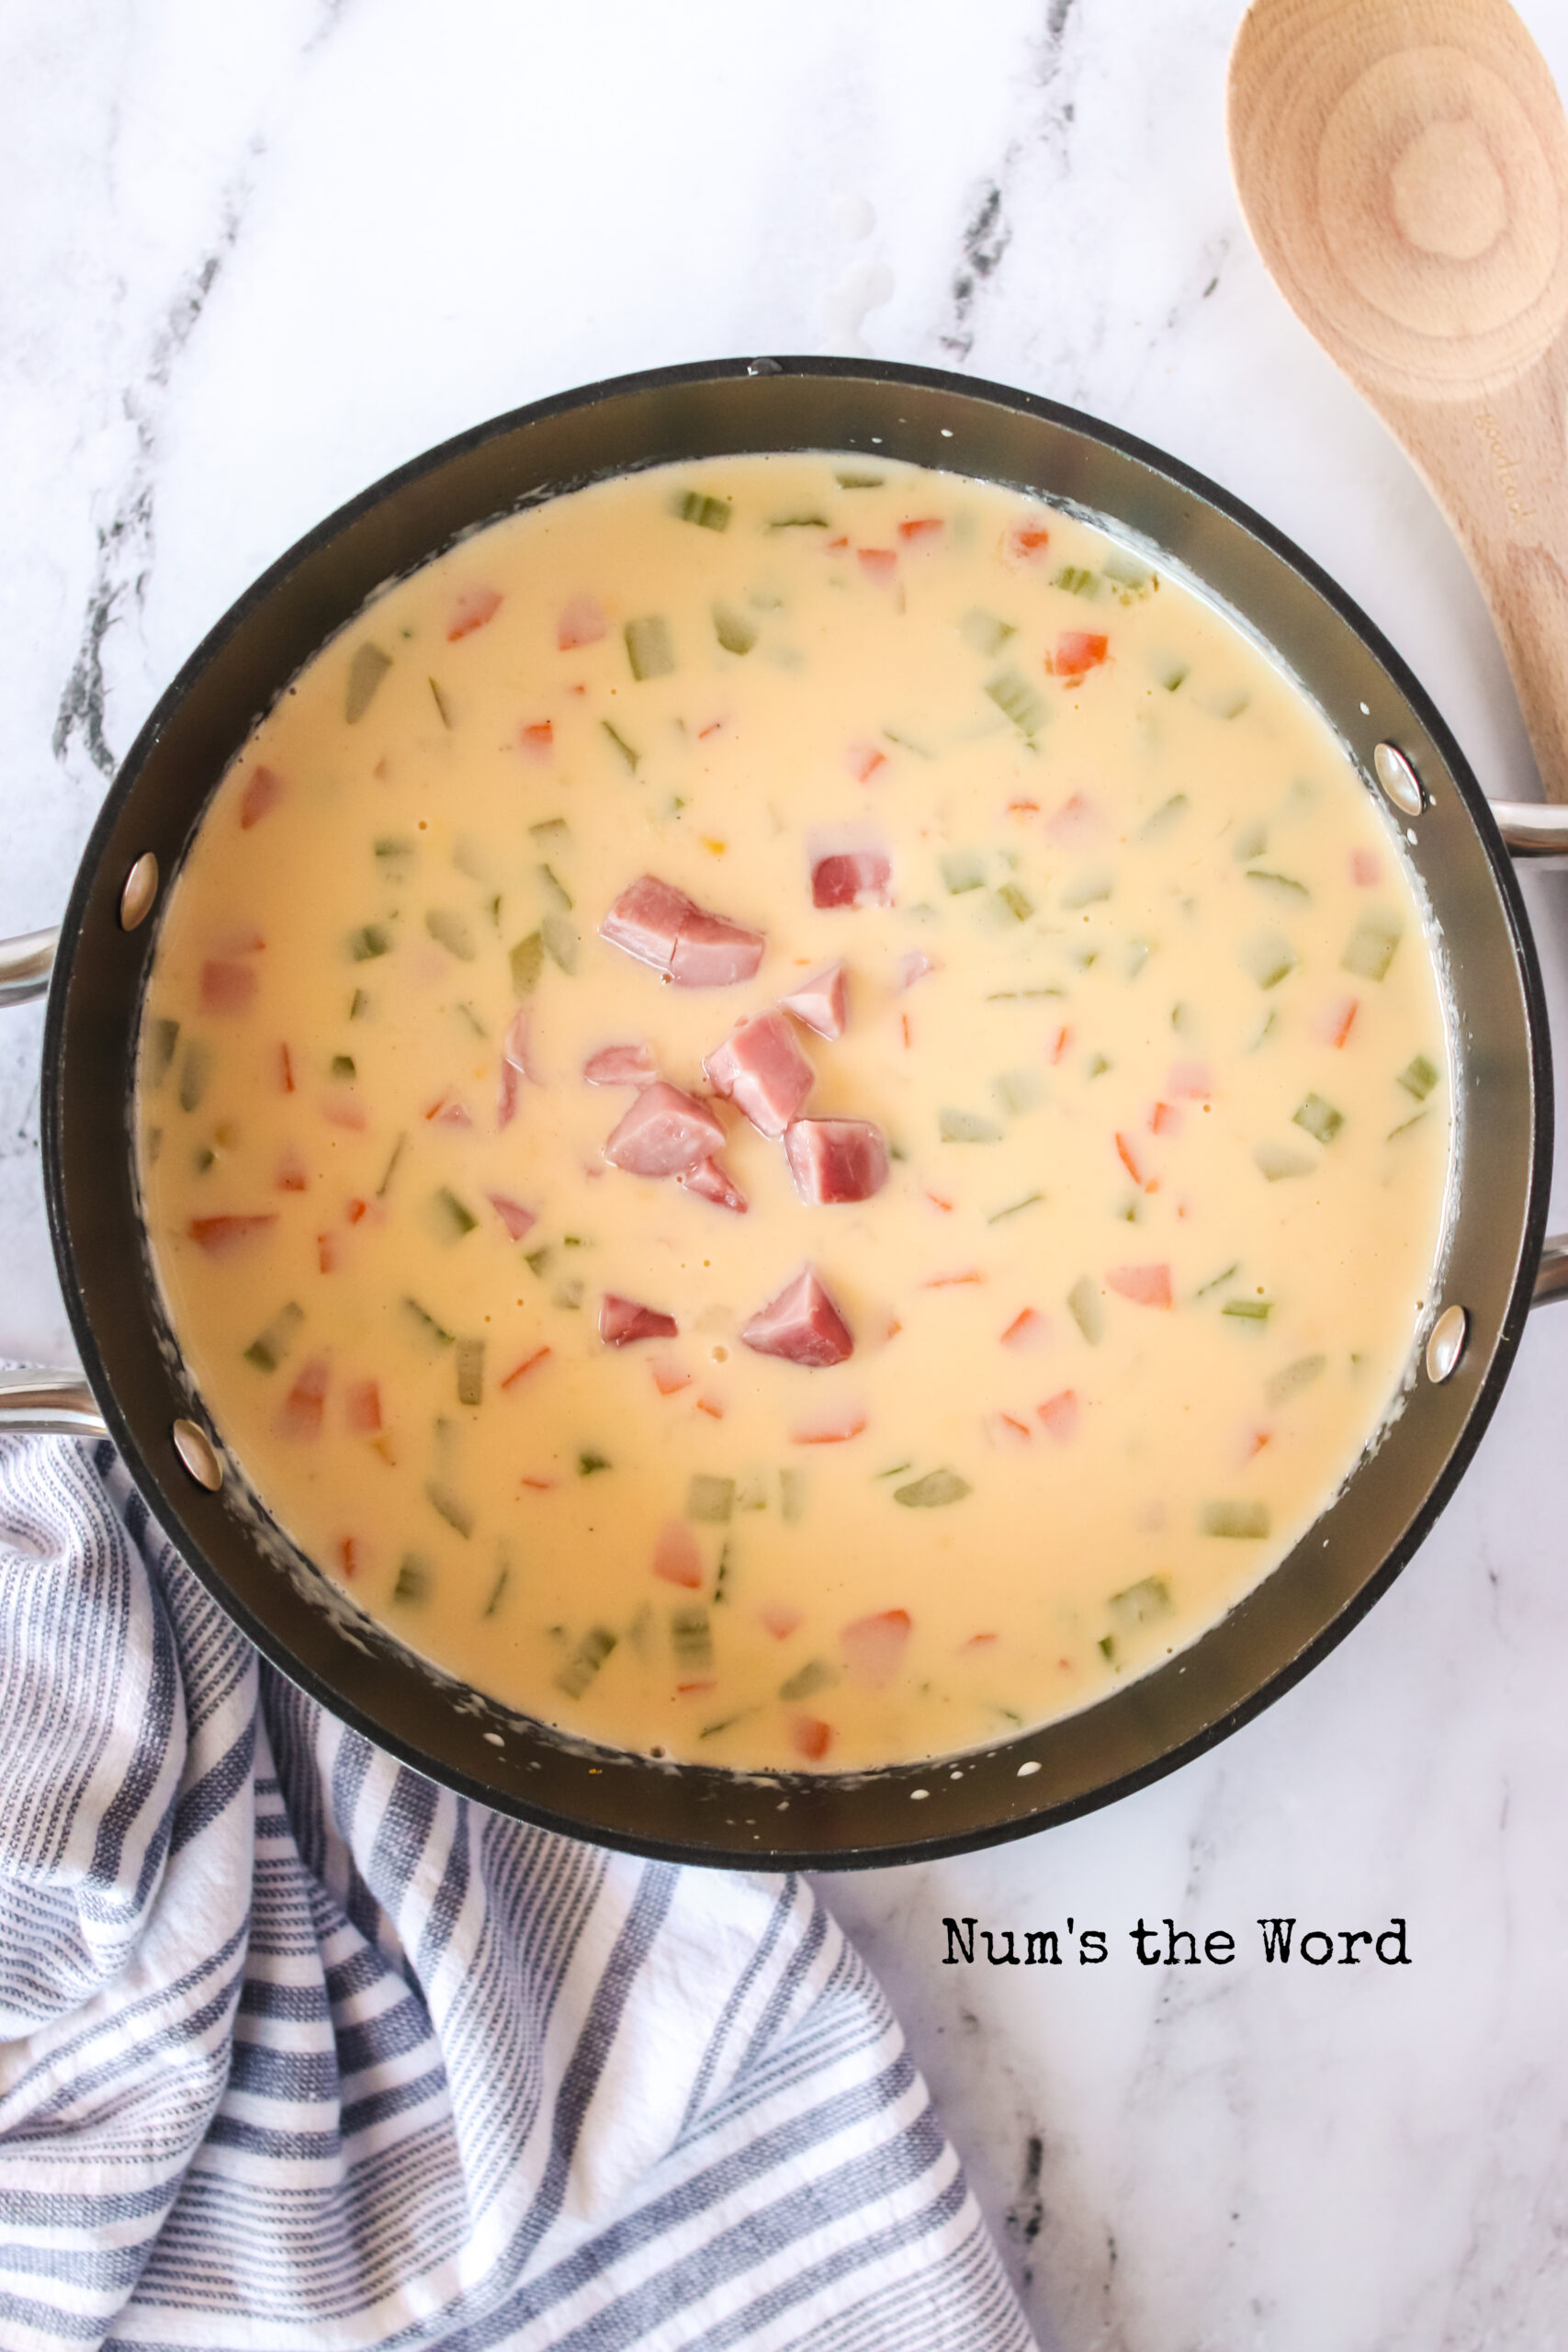 cheese sauce added to potato soup with ham added.